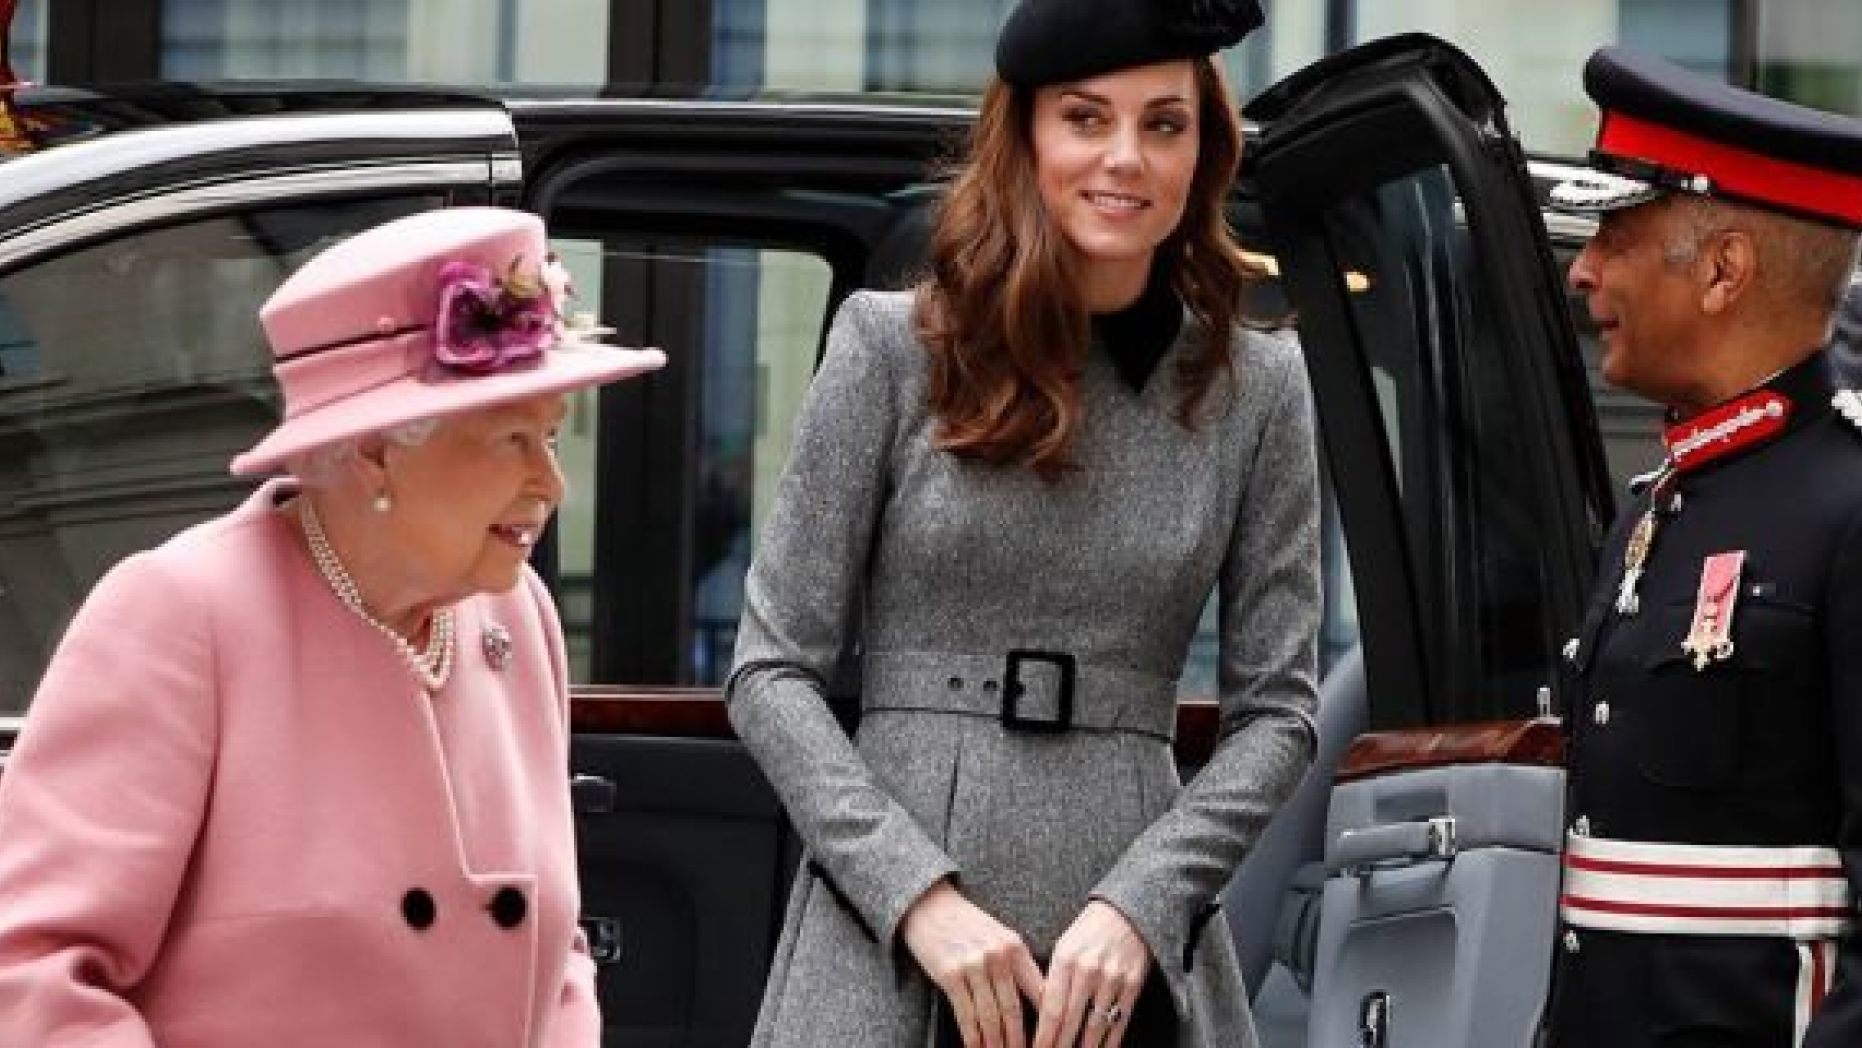 Britains' Queen Elizabeth II accompanied by Kate, Duchess of Cambridge arrives at Kings College in London, Tuesday, March 19, 2019. The Queen and Kate Duchess of Cambridge, will visit King's College London, Tuesday, to open Bush House, the latest education and learning facilities on the Strand Campus.